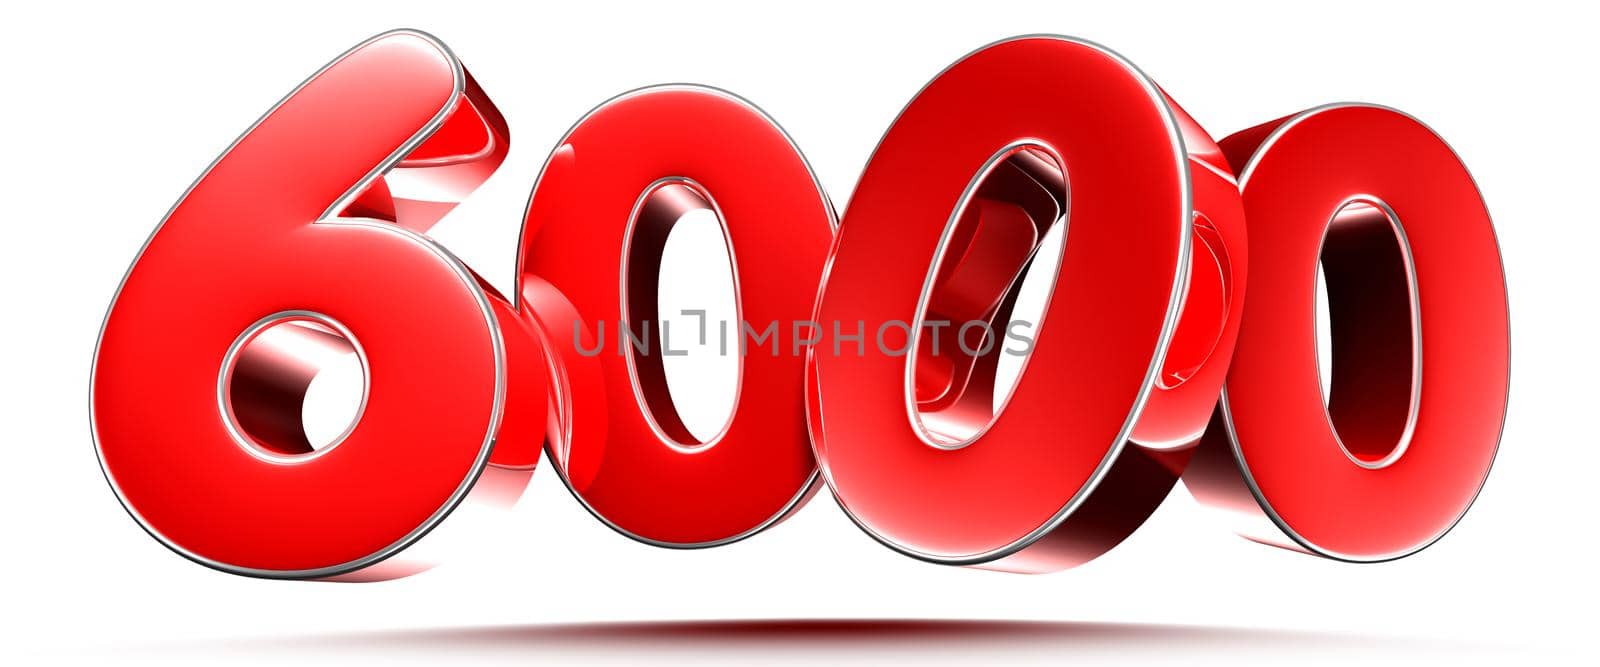 Rounded red numbers 6000 on white background 3D illustration with clipping path